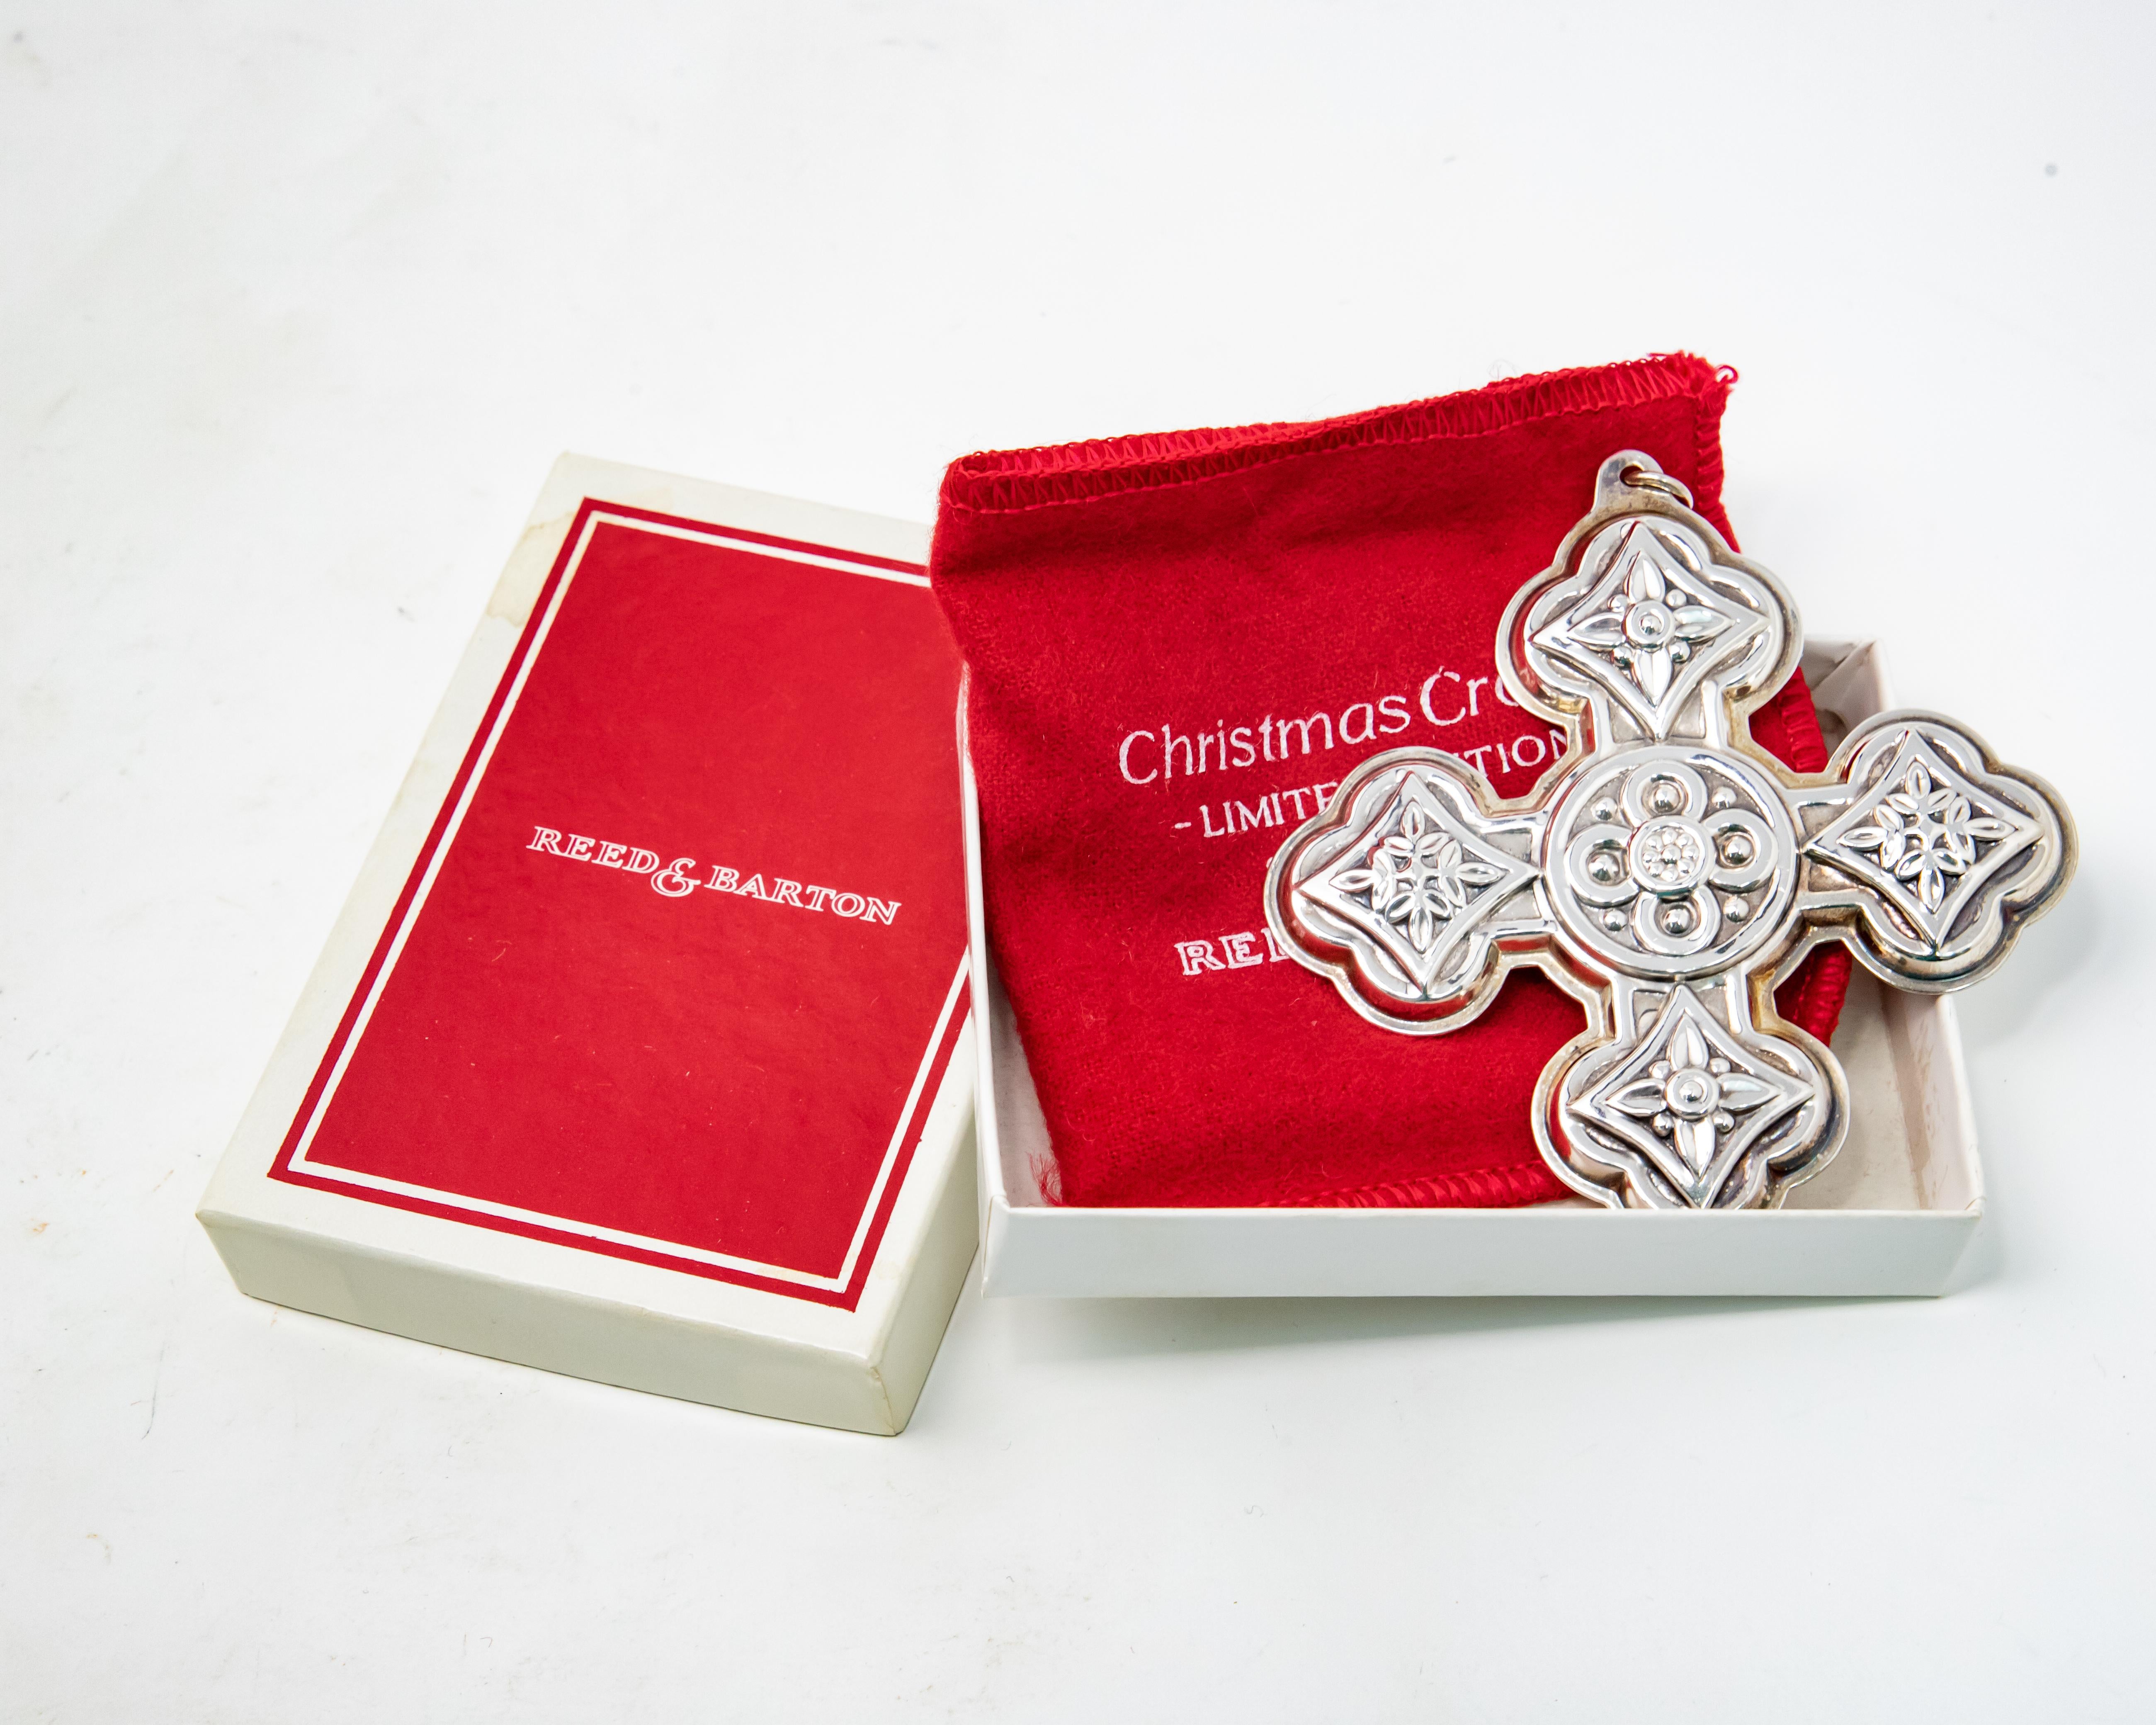 Offering a beautiful Reed & Barton 1971 Christmas cross. This is the 1st in the Annual Series. Also has the original box and velvet bag. Hallmarked on the back with 1971 Christmas Cross and Reed & Barton Sterling.